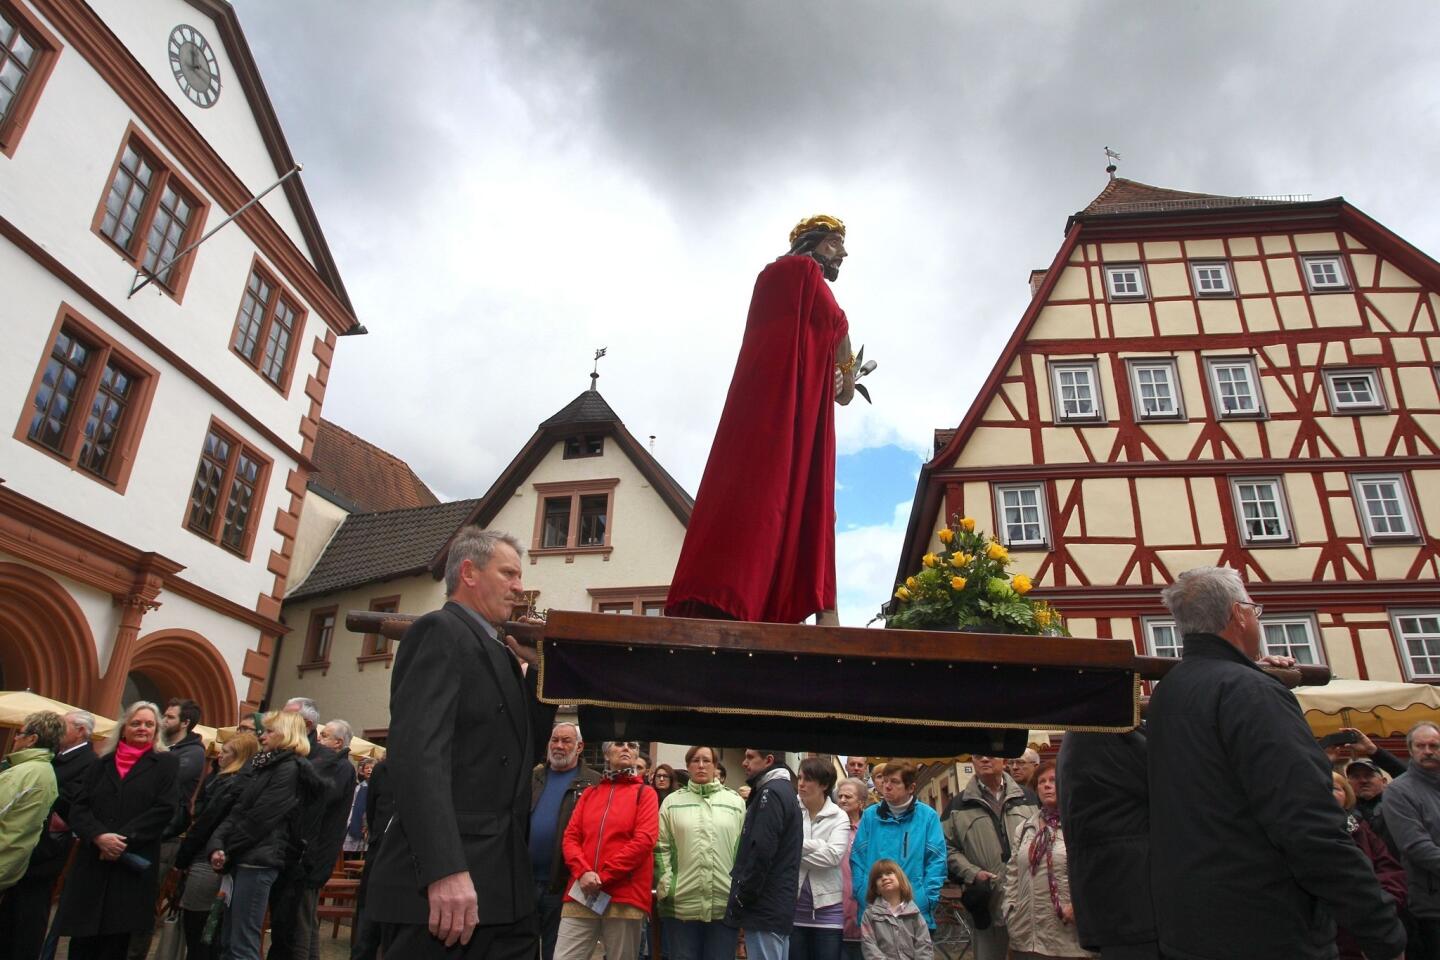 Members of a craftsmen guild carry a statue of Jesus Christ during a Good Friday procession in Lohr am Main, western Germany.